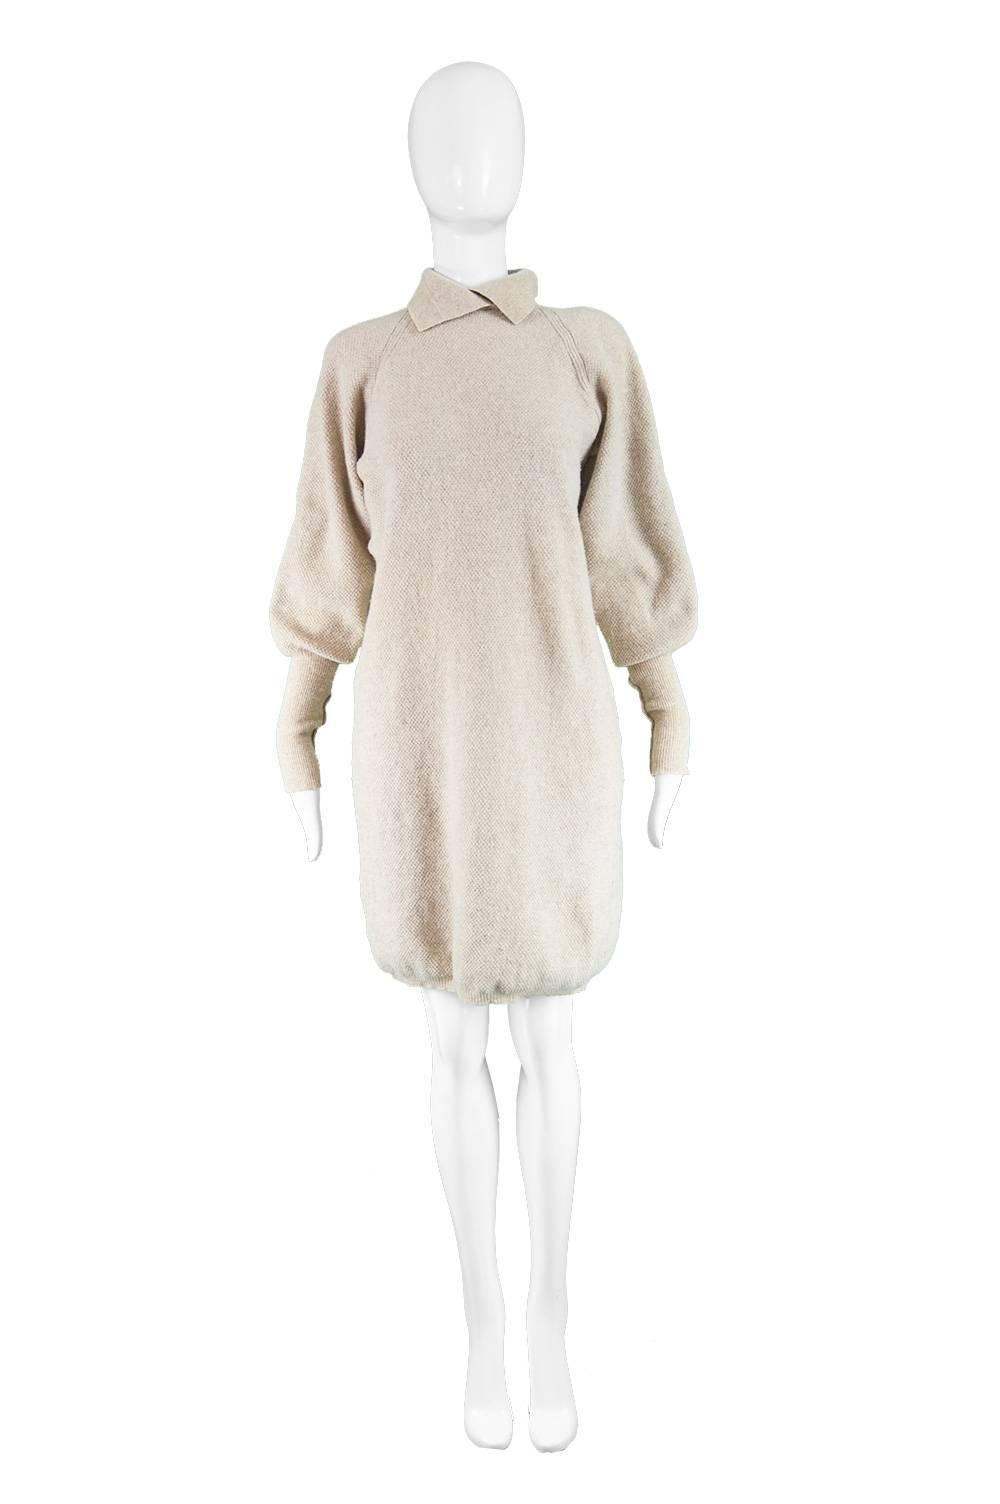 Kenzo Vintage Cream Wool Knitted Leg o Mutton Sleeve Sweater Shift Dress, 1980s

A beautiful vintage jumper dress from the 80s by luxury Japanese born, French designer, Kenzo, In a soft, cream / stone colored Italian lambs wool knit fabric with